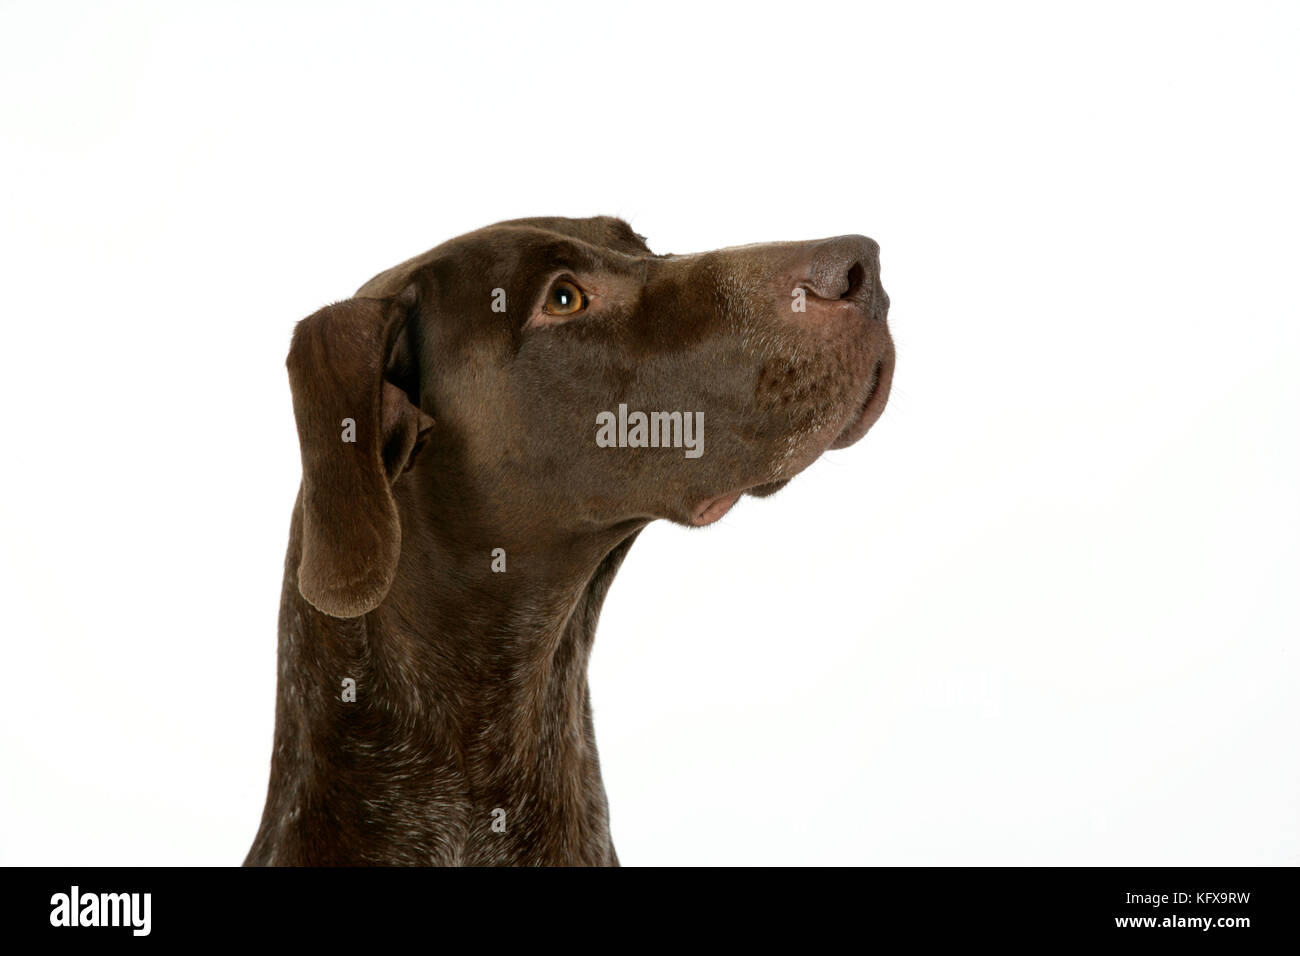 DOG. German shorthaired pointer Stock Photo